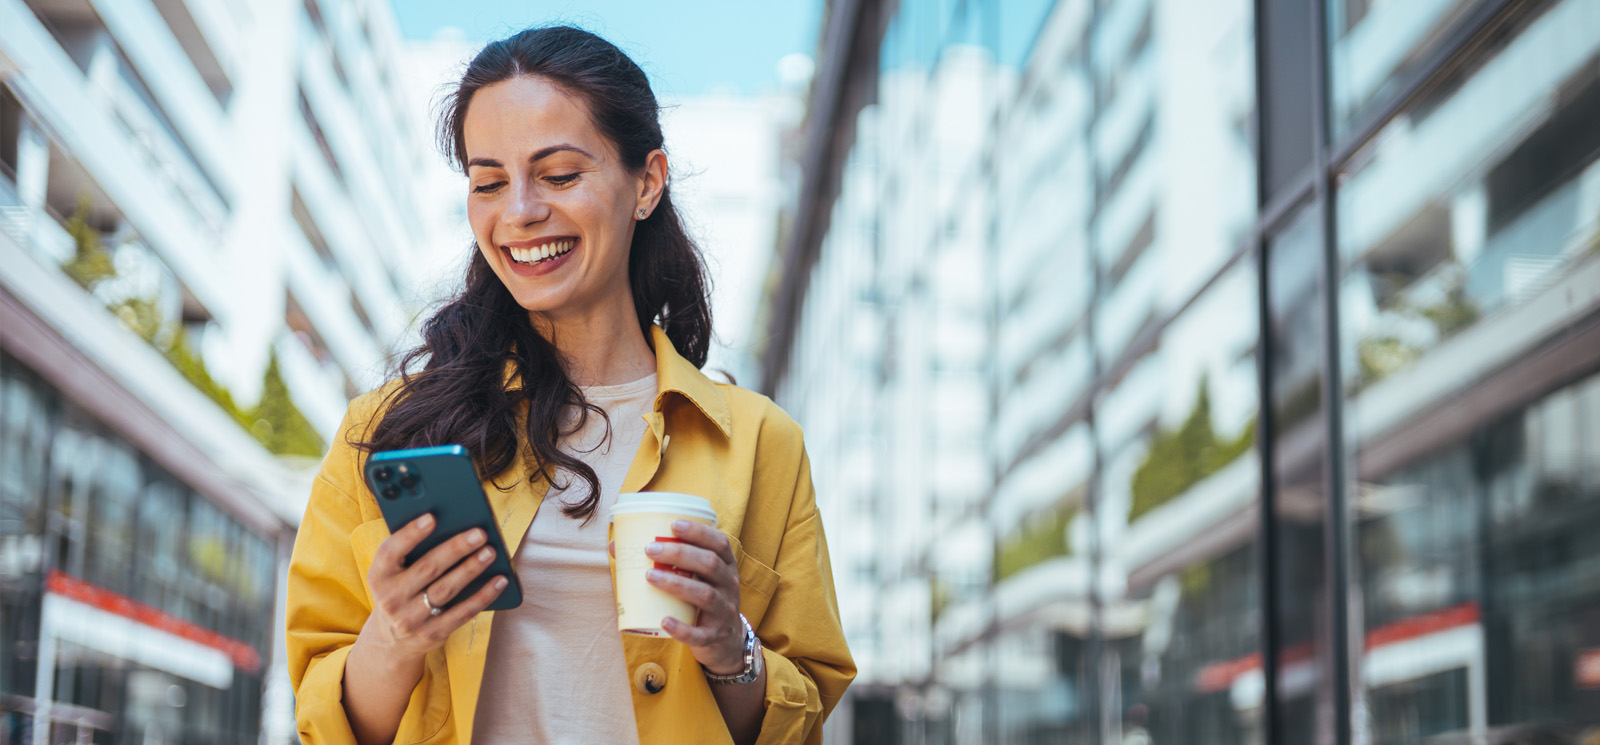 Smiling woman holding a coffee while looking at her cell phone